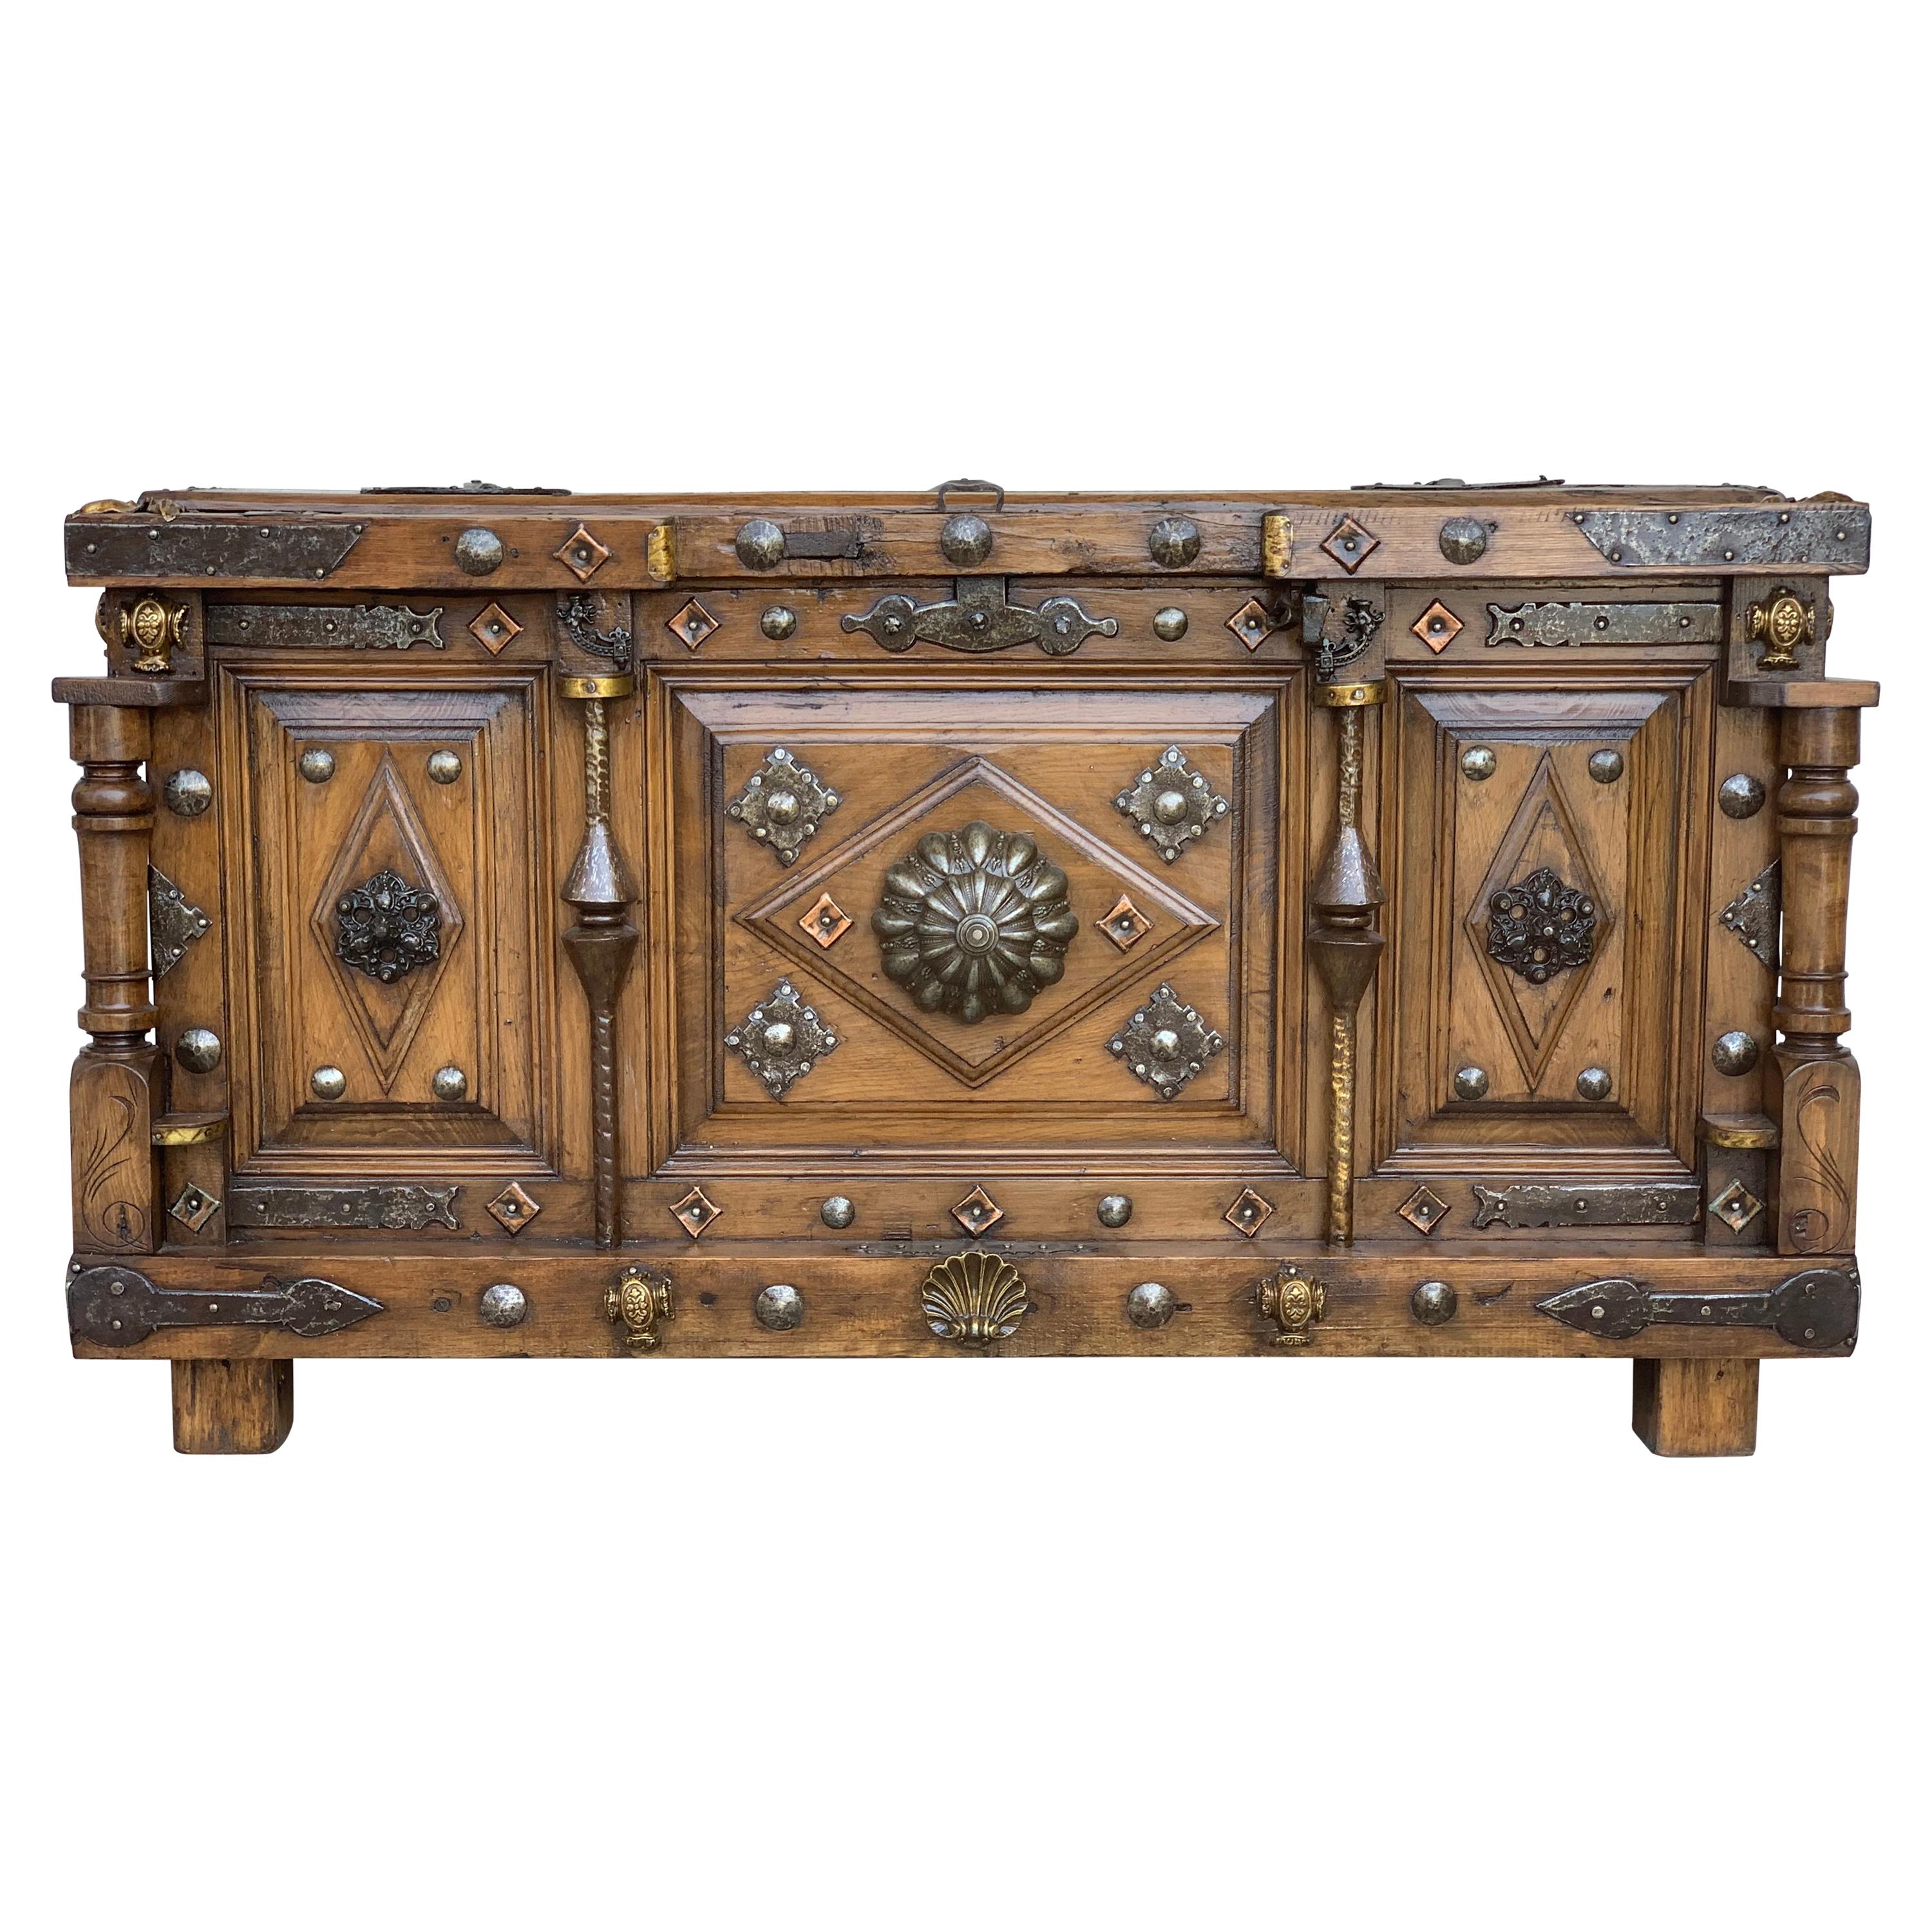 19th Century Spanish Walnut Trunk with Bronze Mounts and Decorative Nails